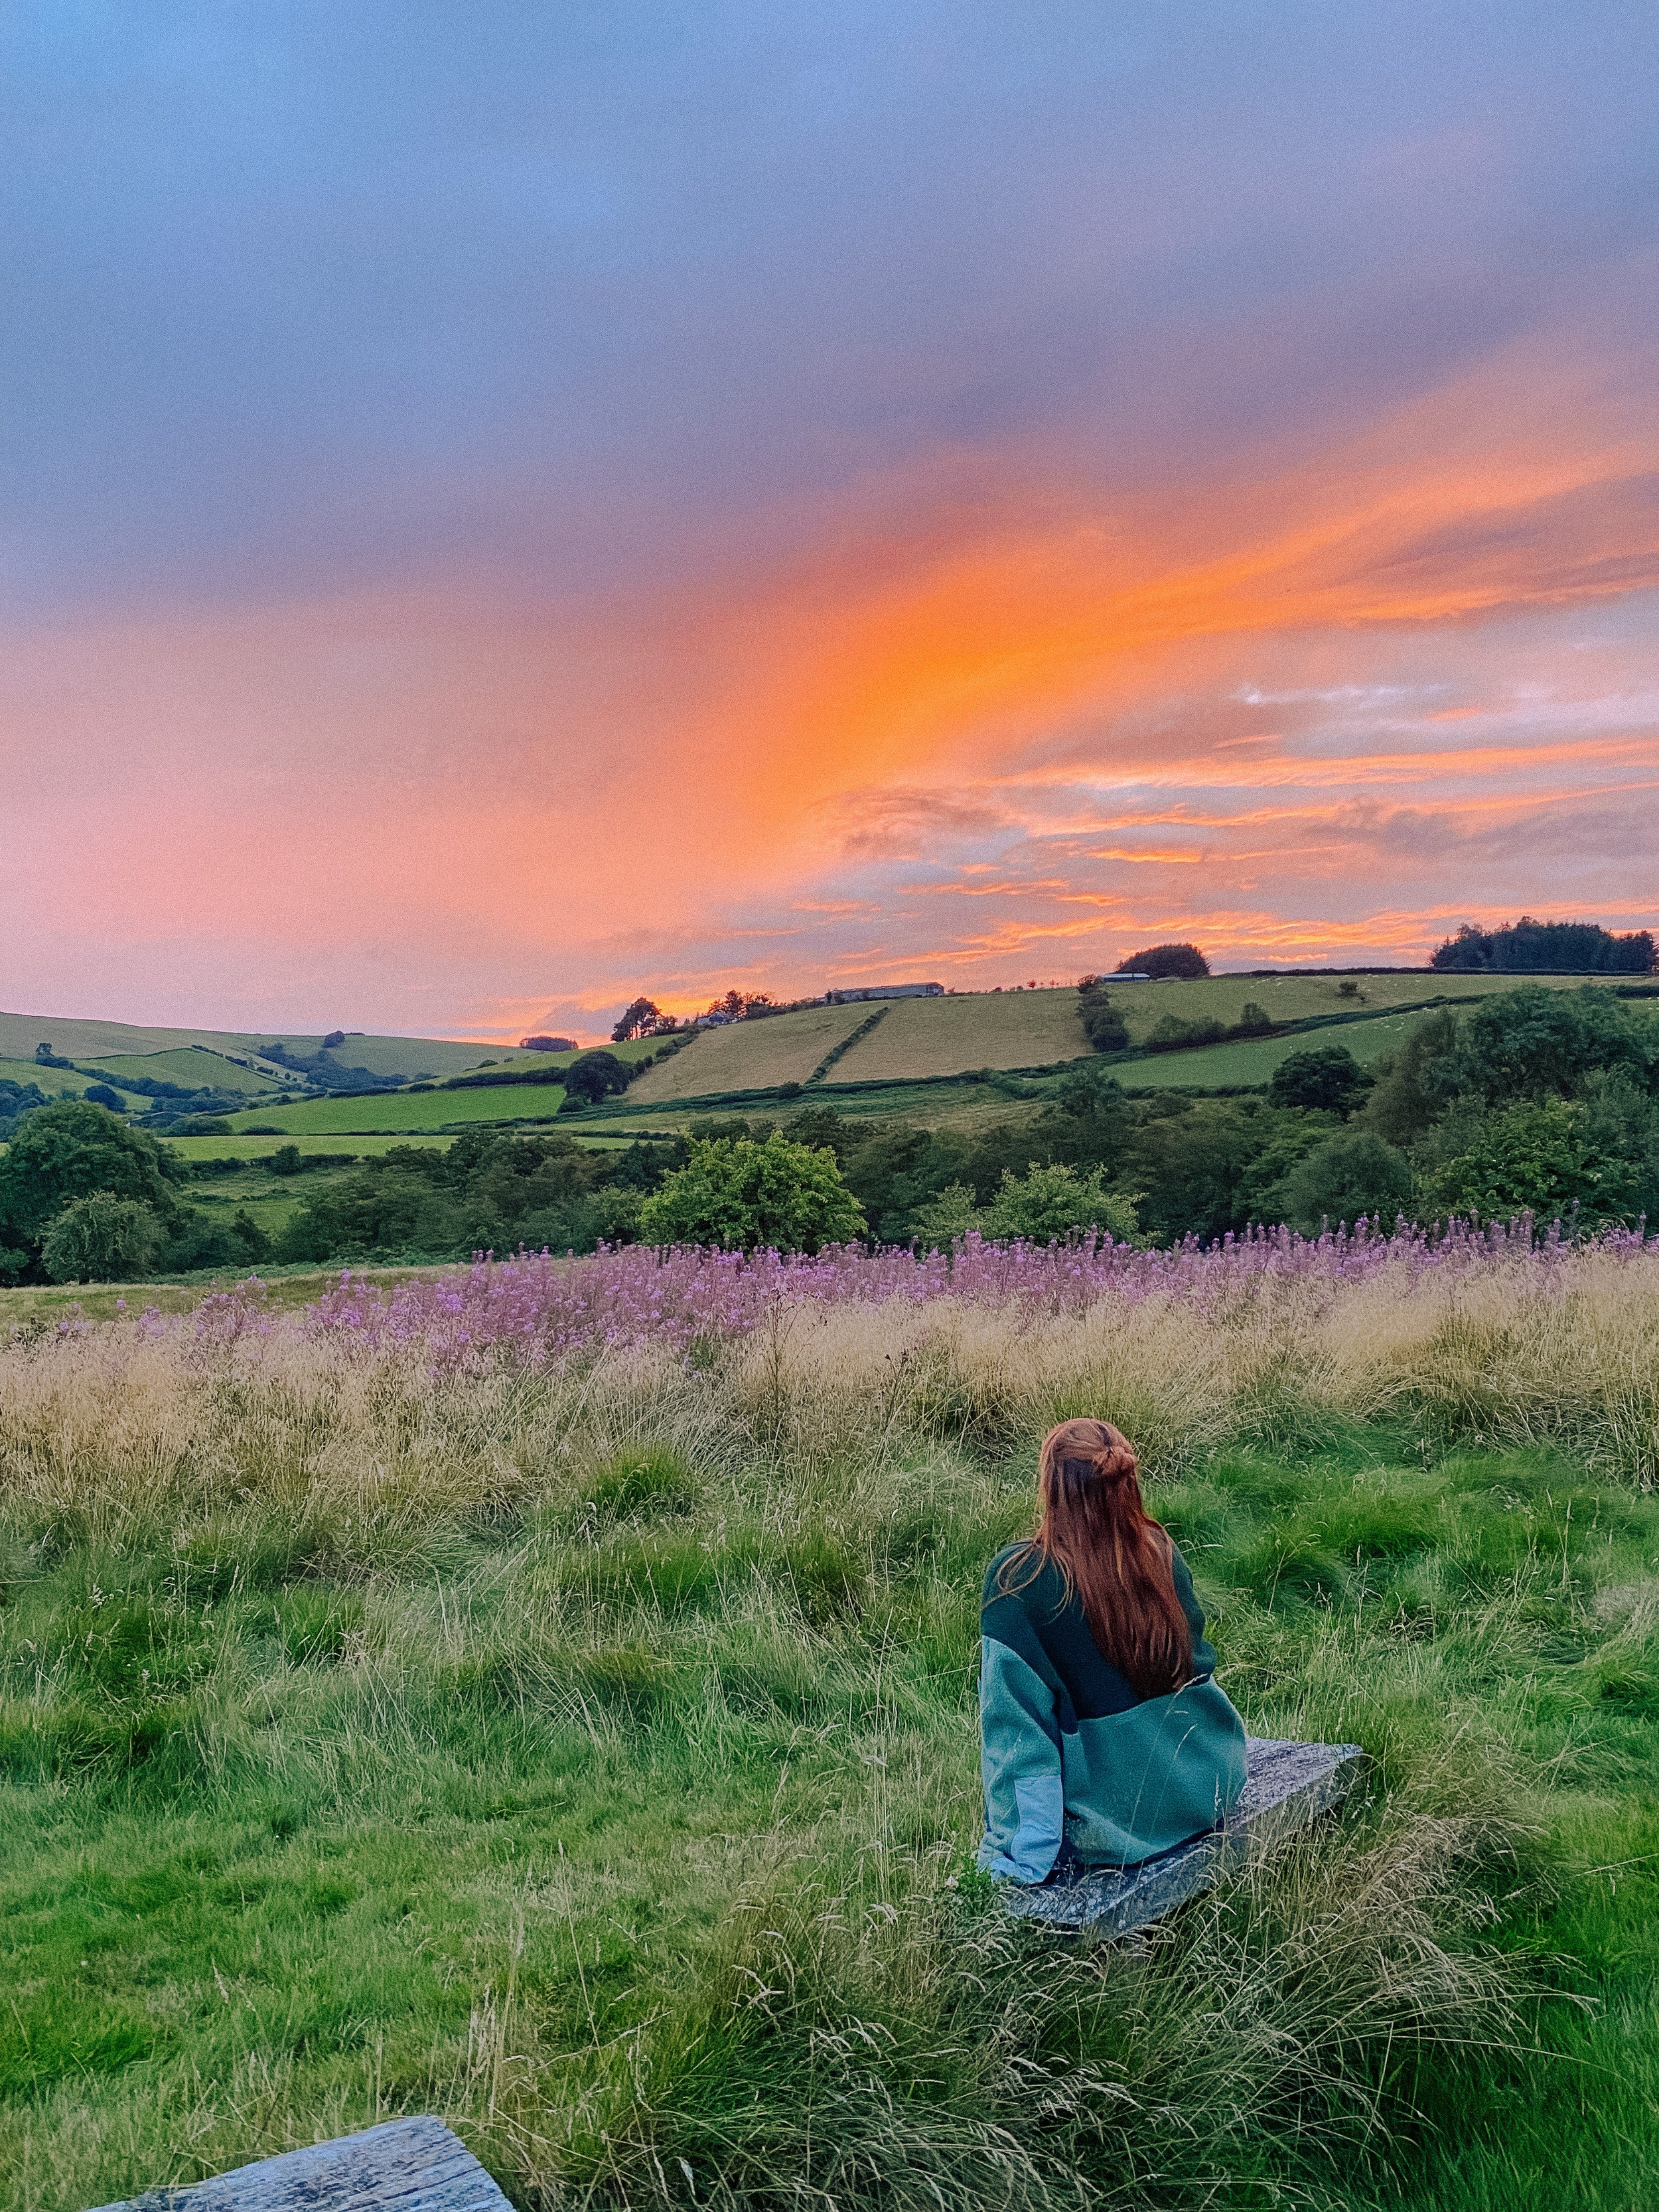 a dreamy outdoor escape - come by, wales-32.jpg